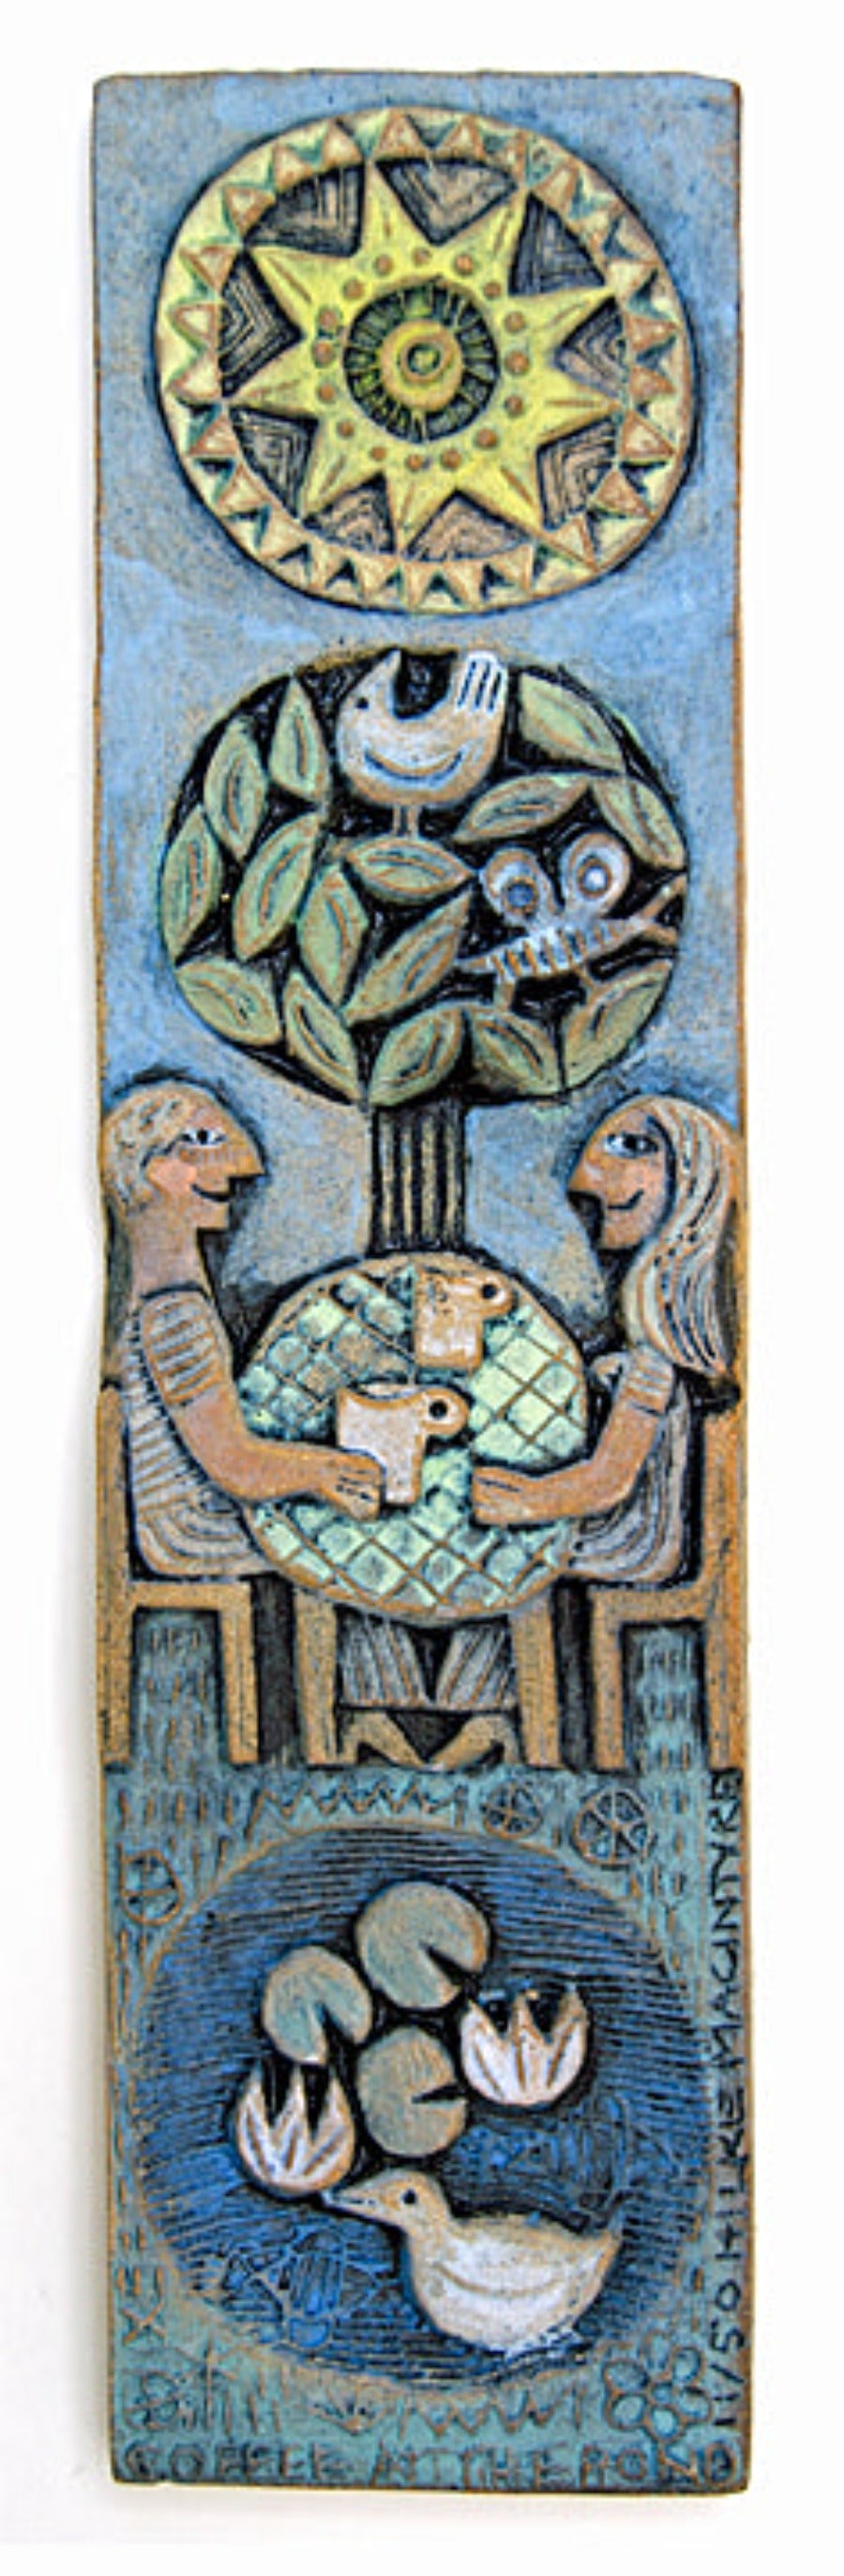 Coffee at the Pond by Hilke Macintyre | Contemporary Ceramics for sale at The Biscuit Factory Newcastle